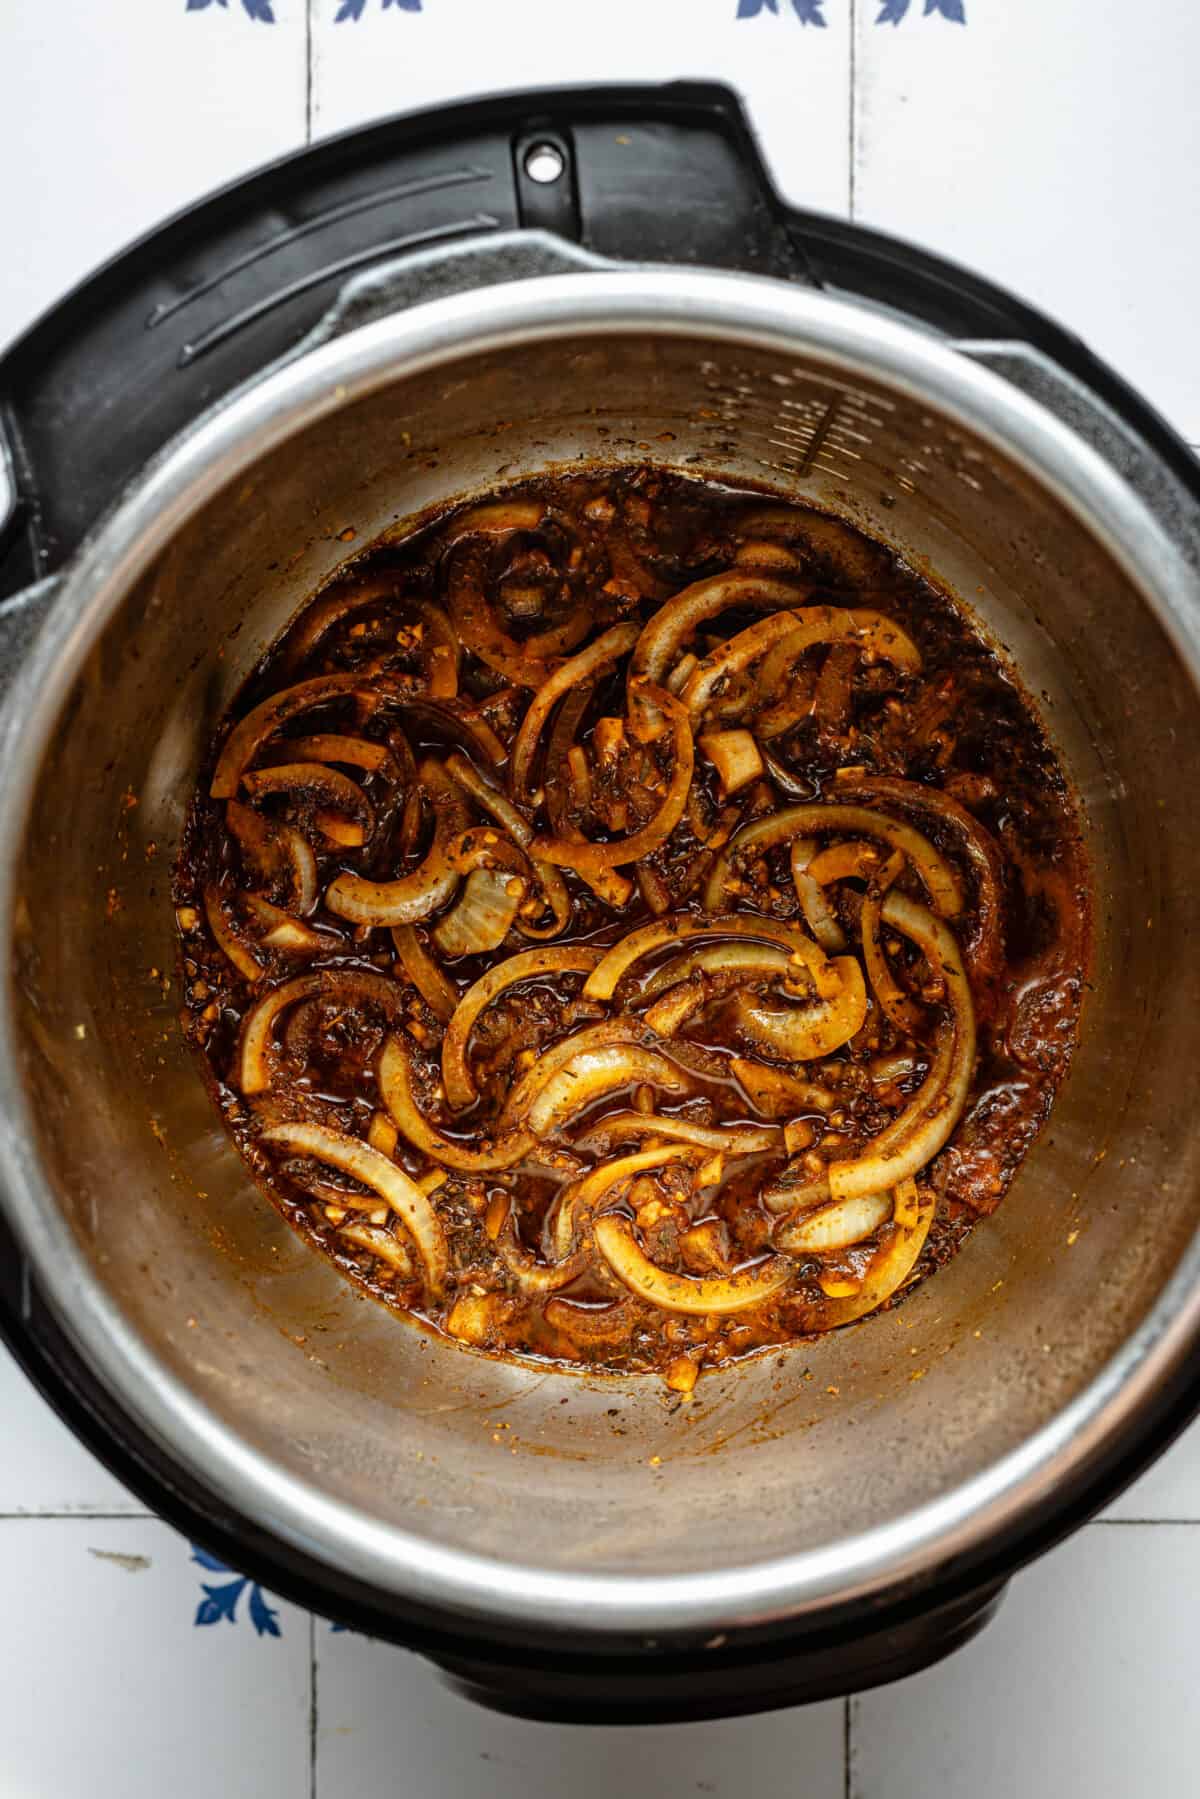 Onions, garlic, and other seasonings in Instant Pot.